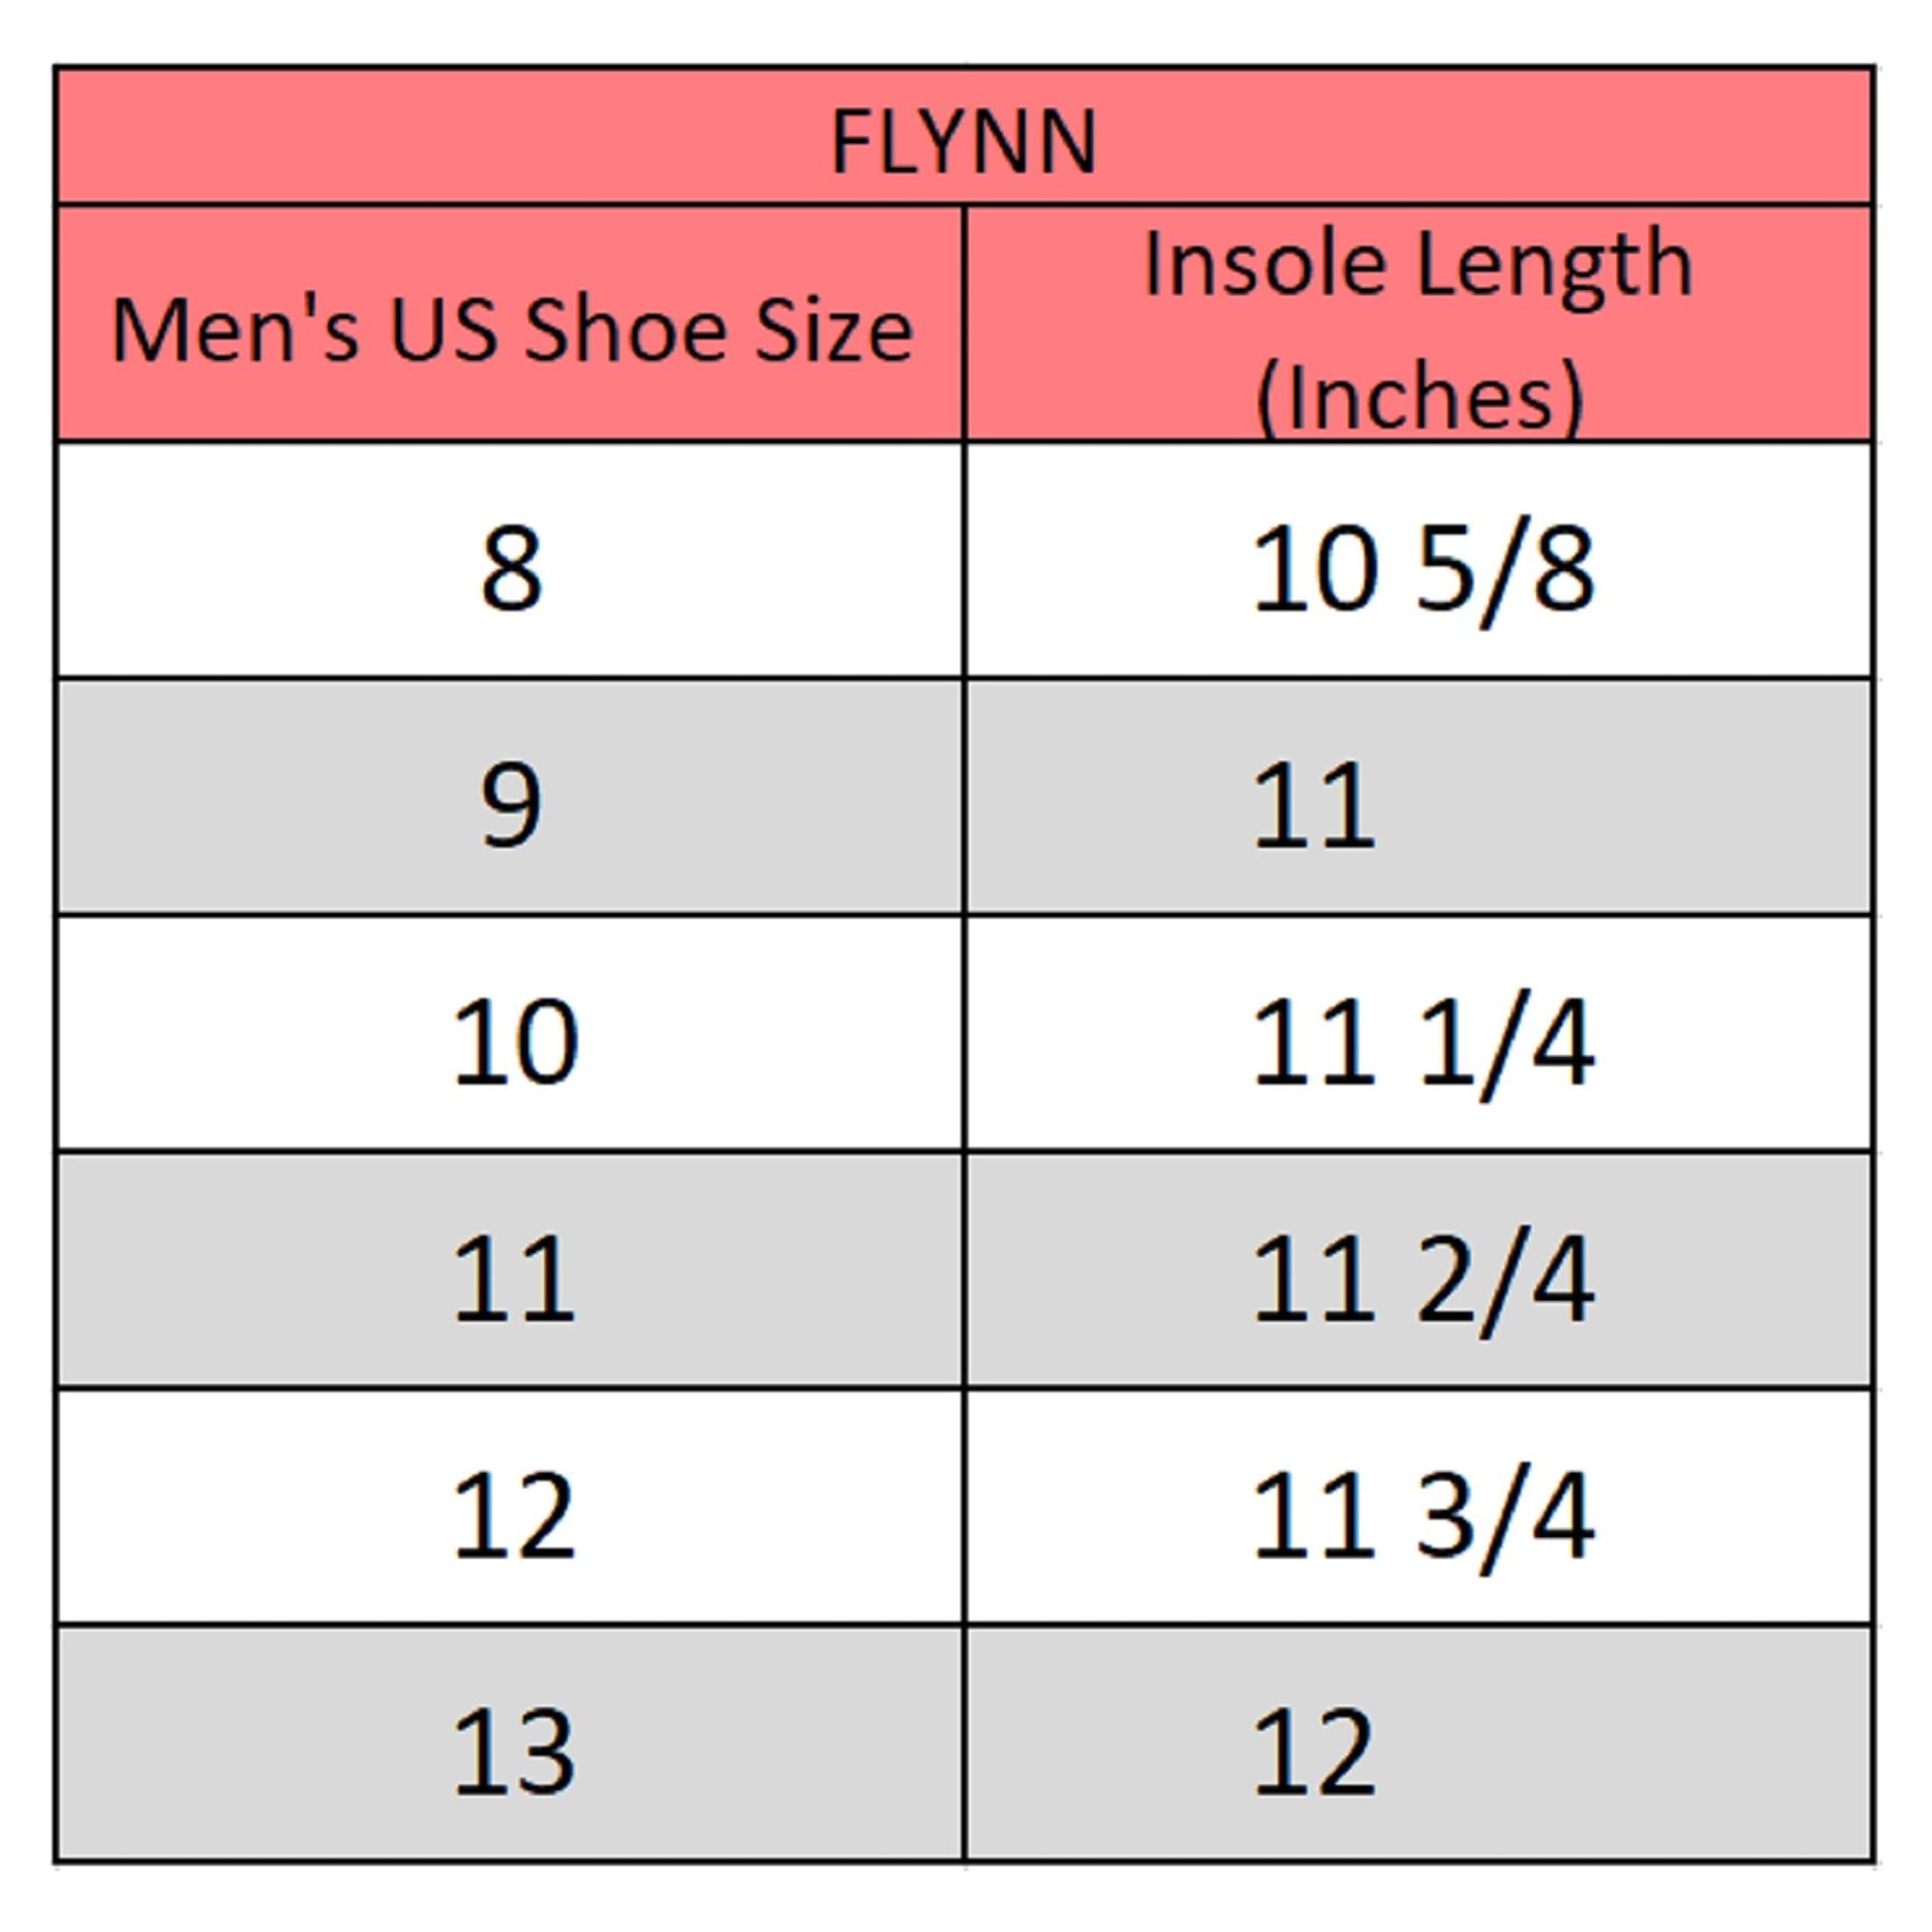 Alpine Swiss Flynn Mens Boat Shoes Casual Slip On Moccasin Loafers Sailing Deck Shoe So Light It Floats On Water - image 5 of 7